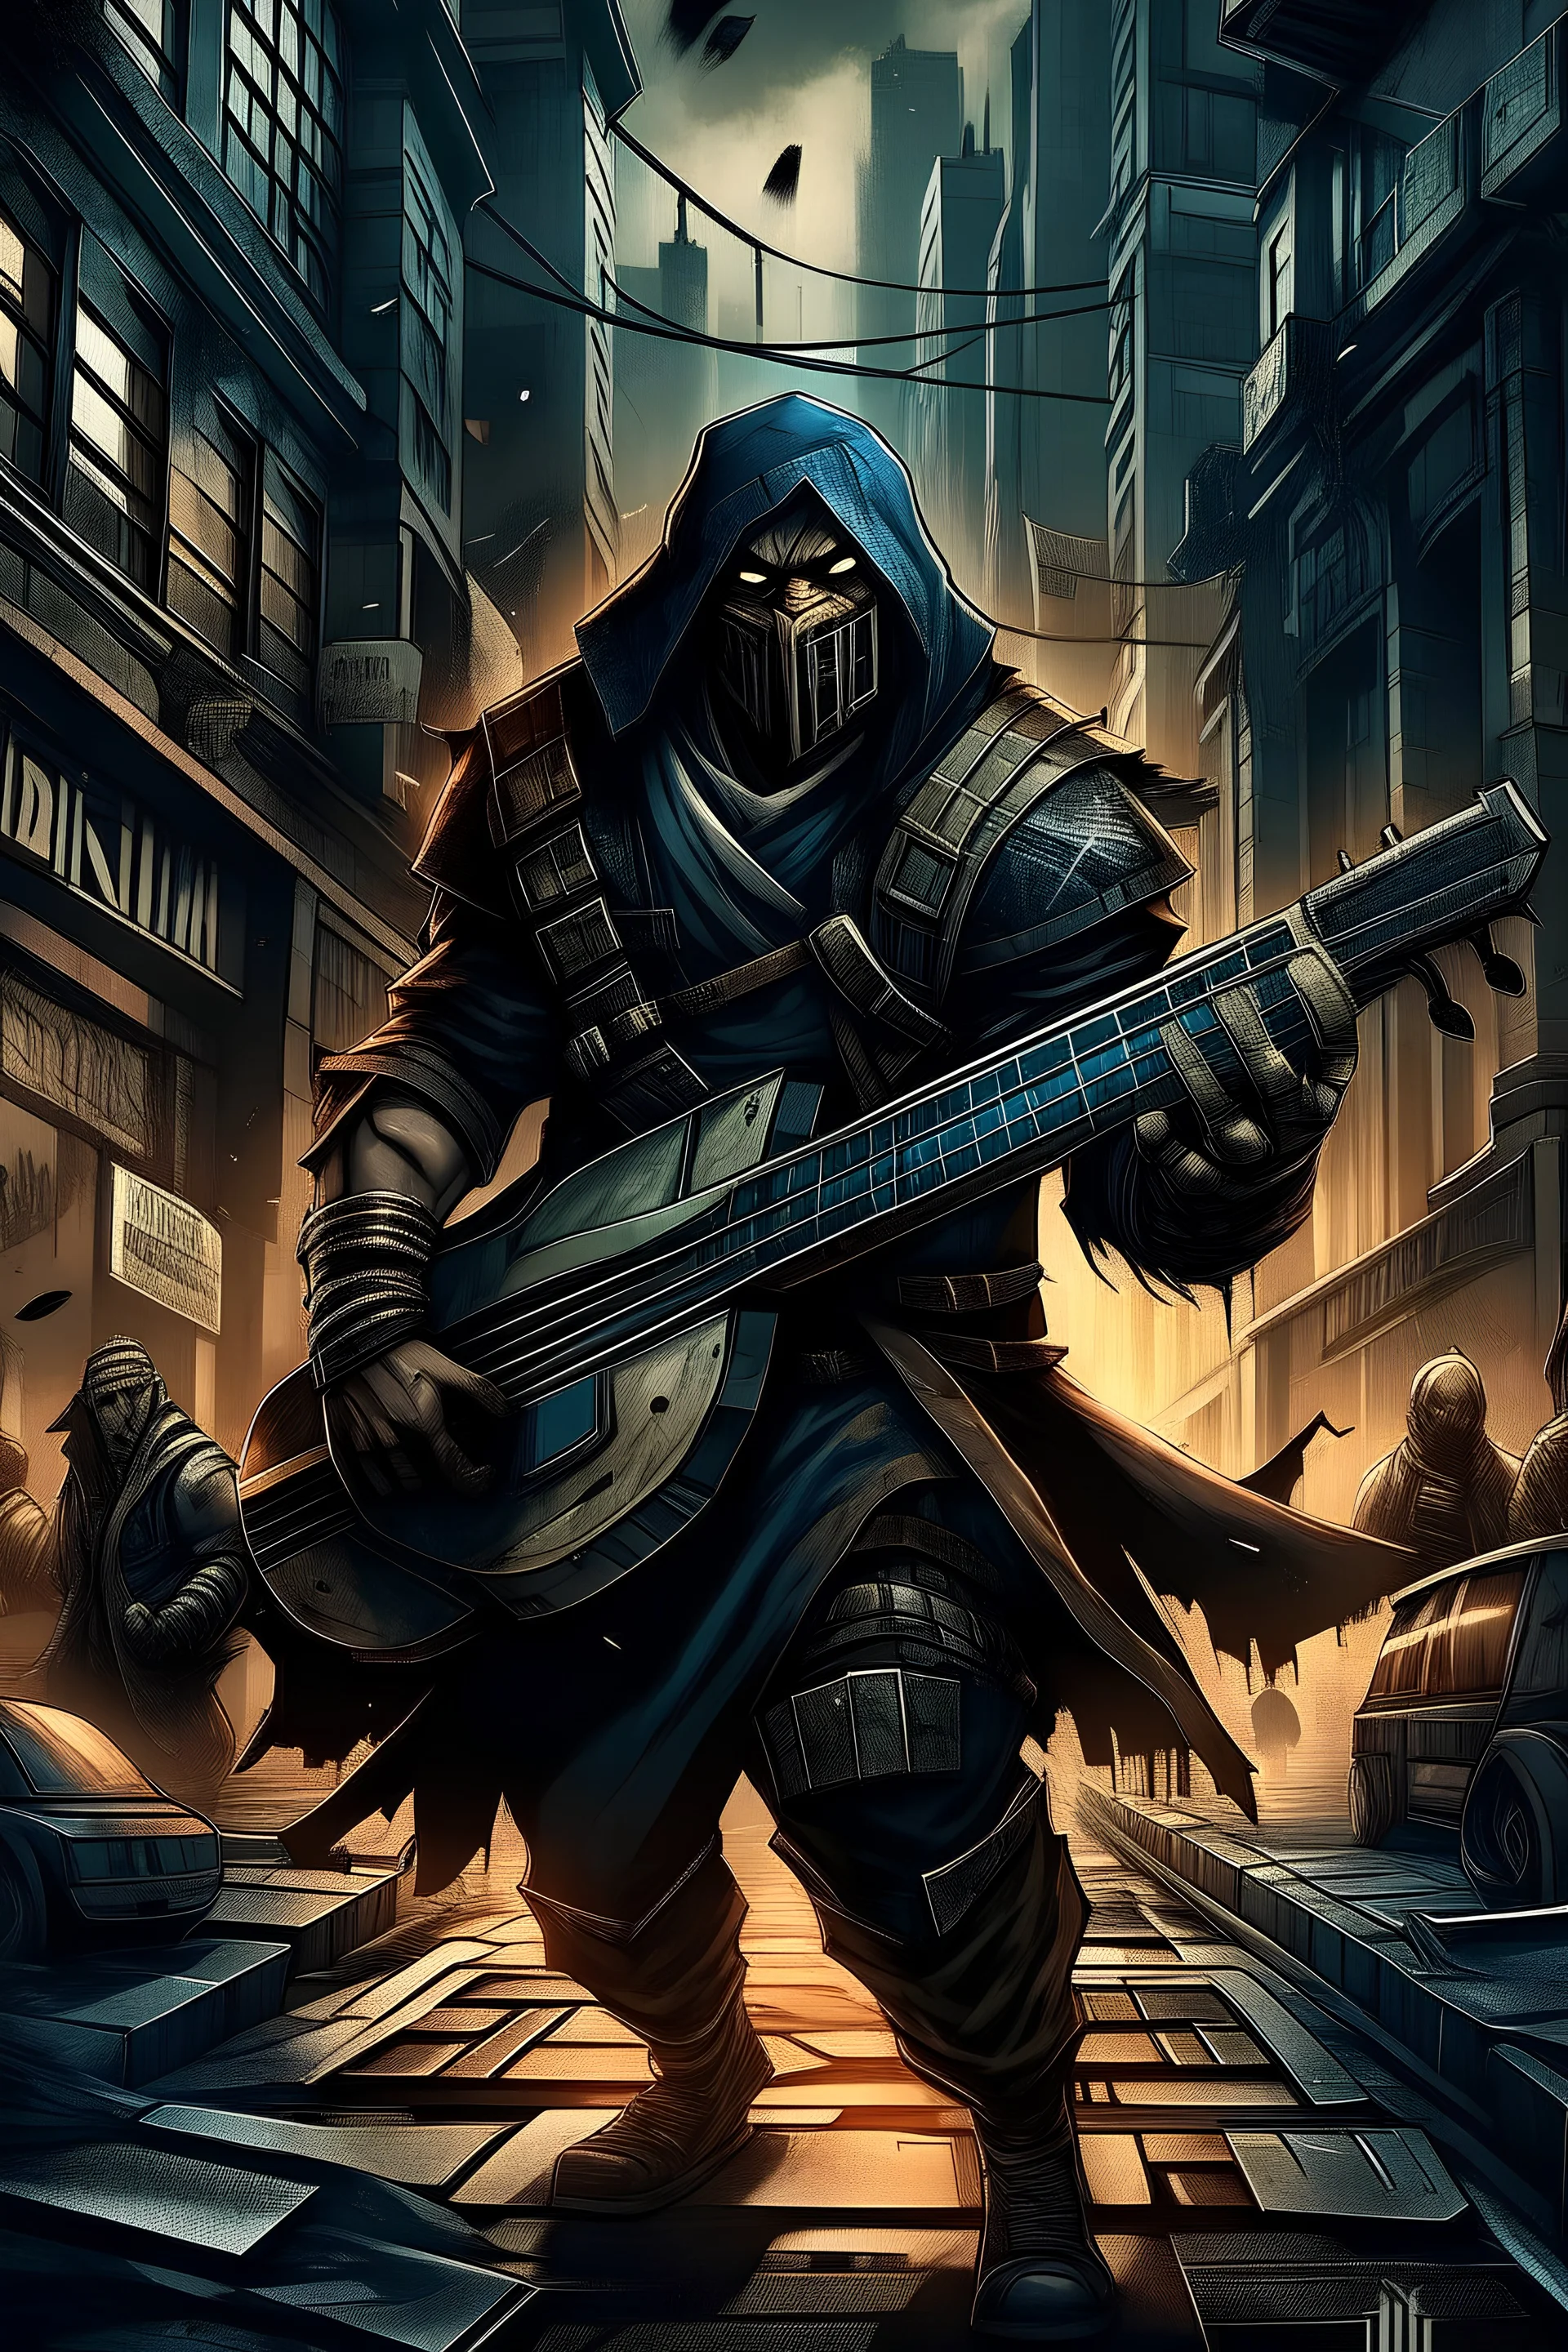 LUDAK, a street warrior in a bustling metropolis, discovers his power to create music that reveals the truth about a malevolent force. With his lyrics, he rallies the disenchanted to join his covert fight against the darkness.